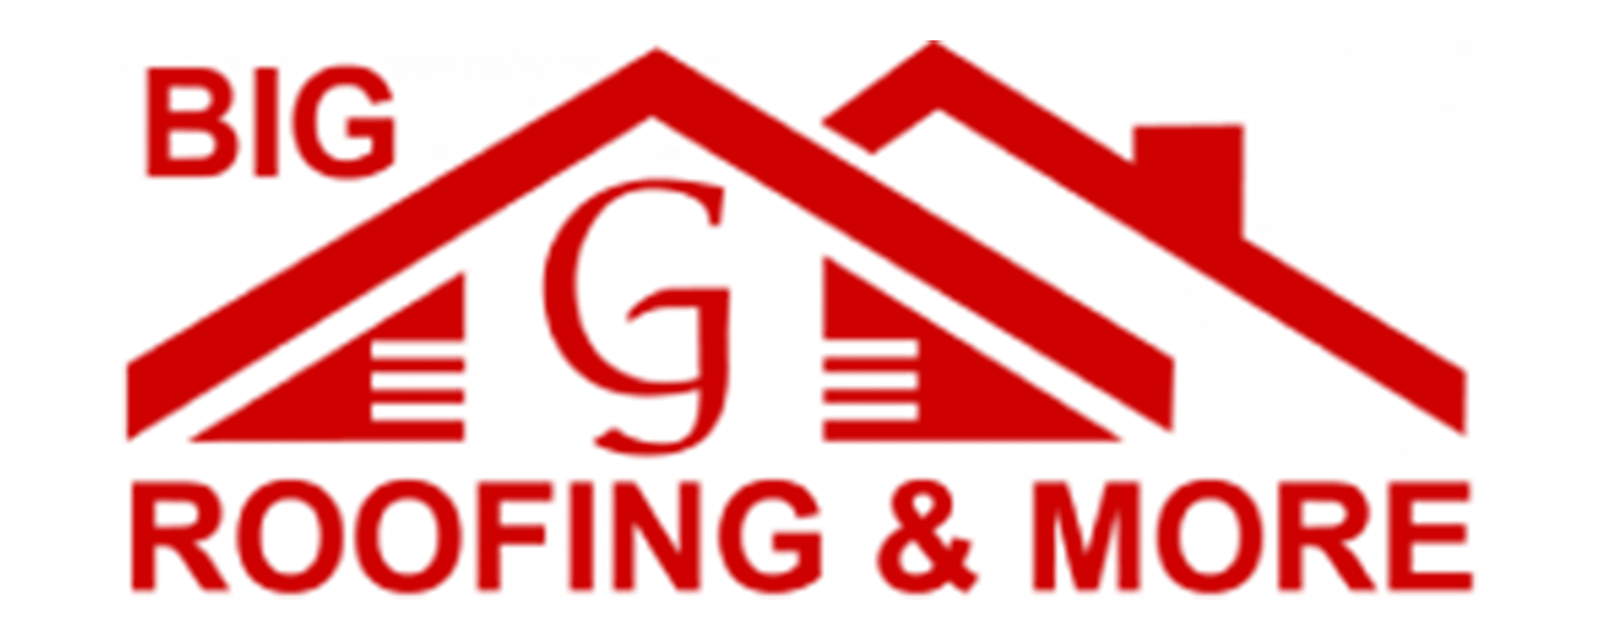 Big G Roofing